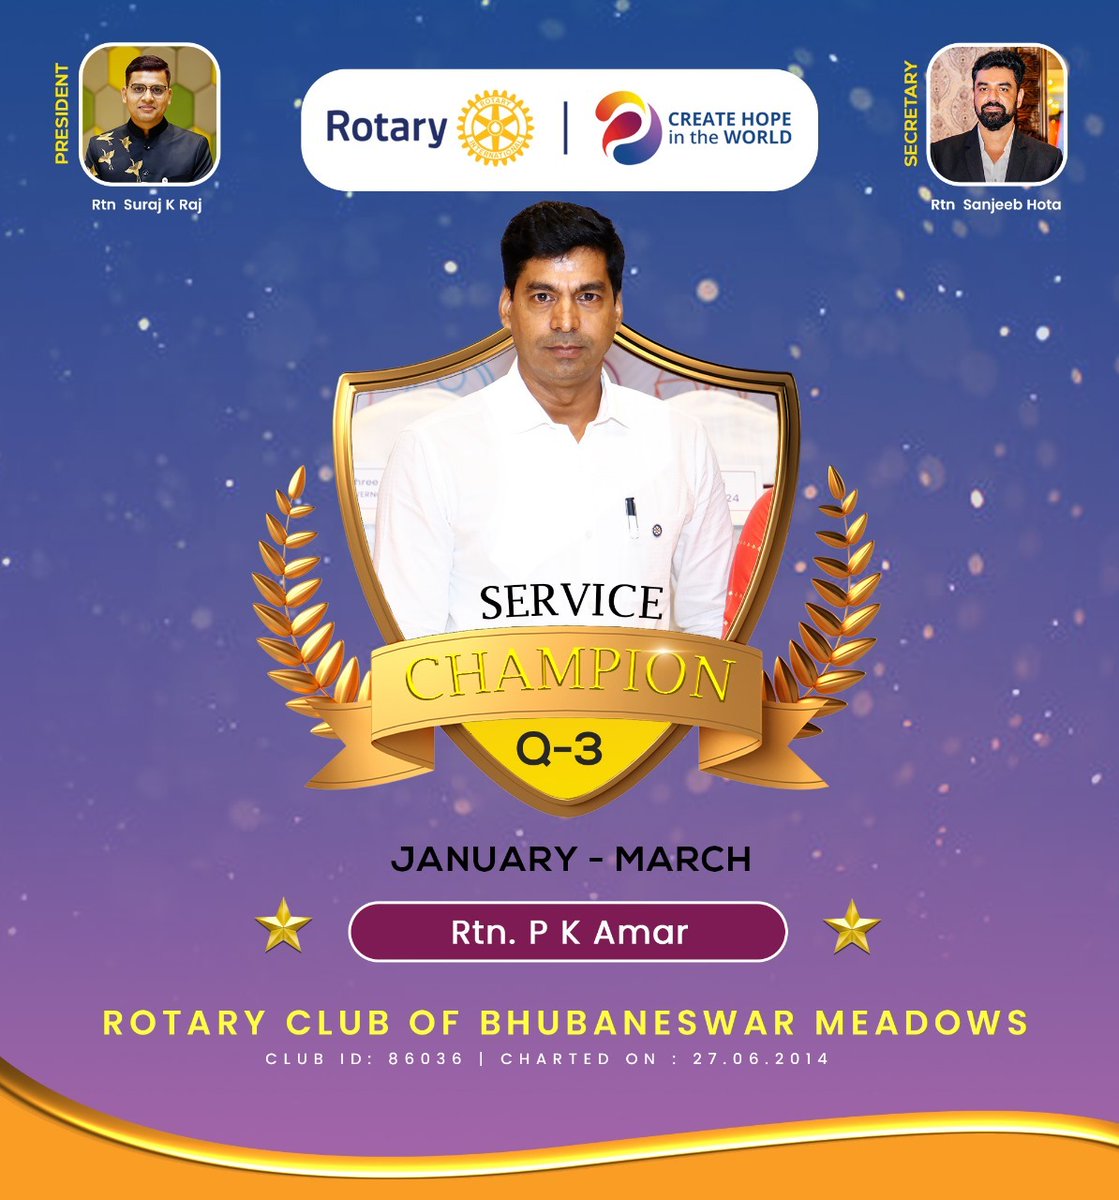 🎉✨ Congratulations to Rtn PK Amar for being awarded the Service Champion of the Third Quarter by the Rotary Club of Bhubaneswar Meadows! 🏆👏🌟 #ServiceChampion #RotaryClub #BhubaneswarMeadows #CommunityService #Inspiration #Congratulations